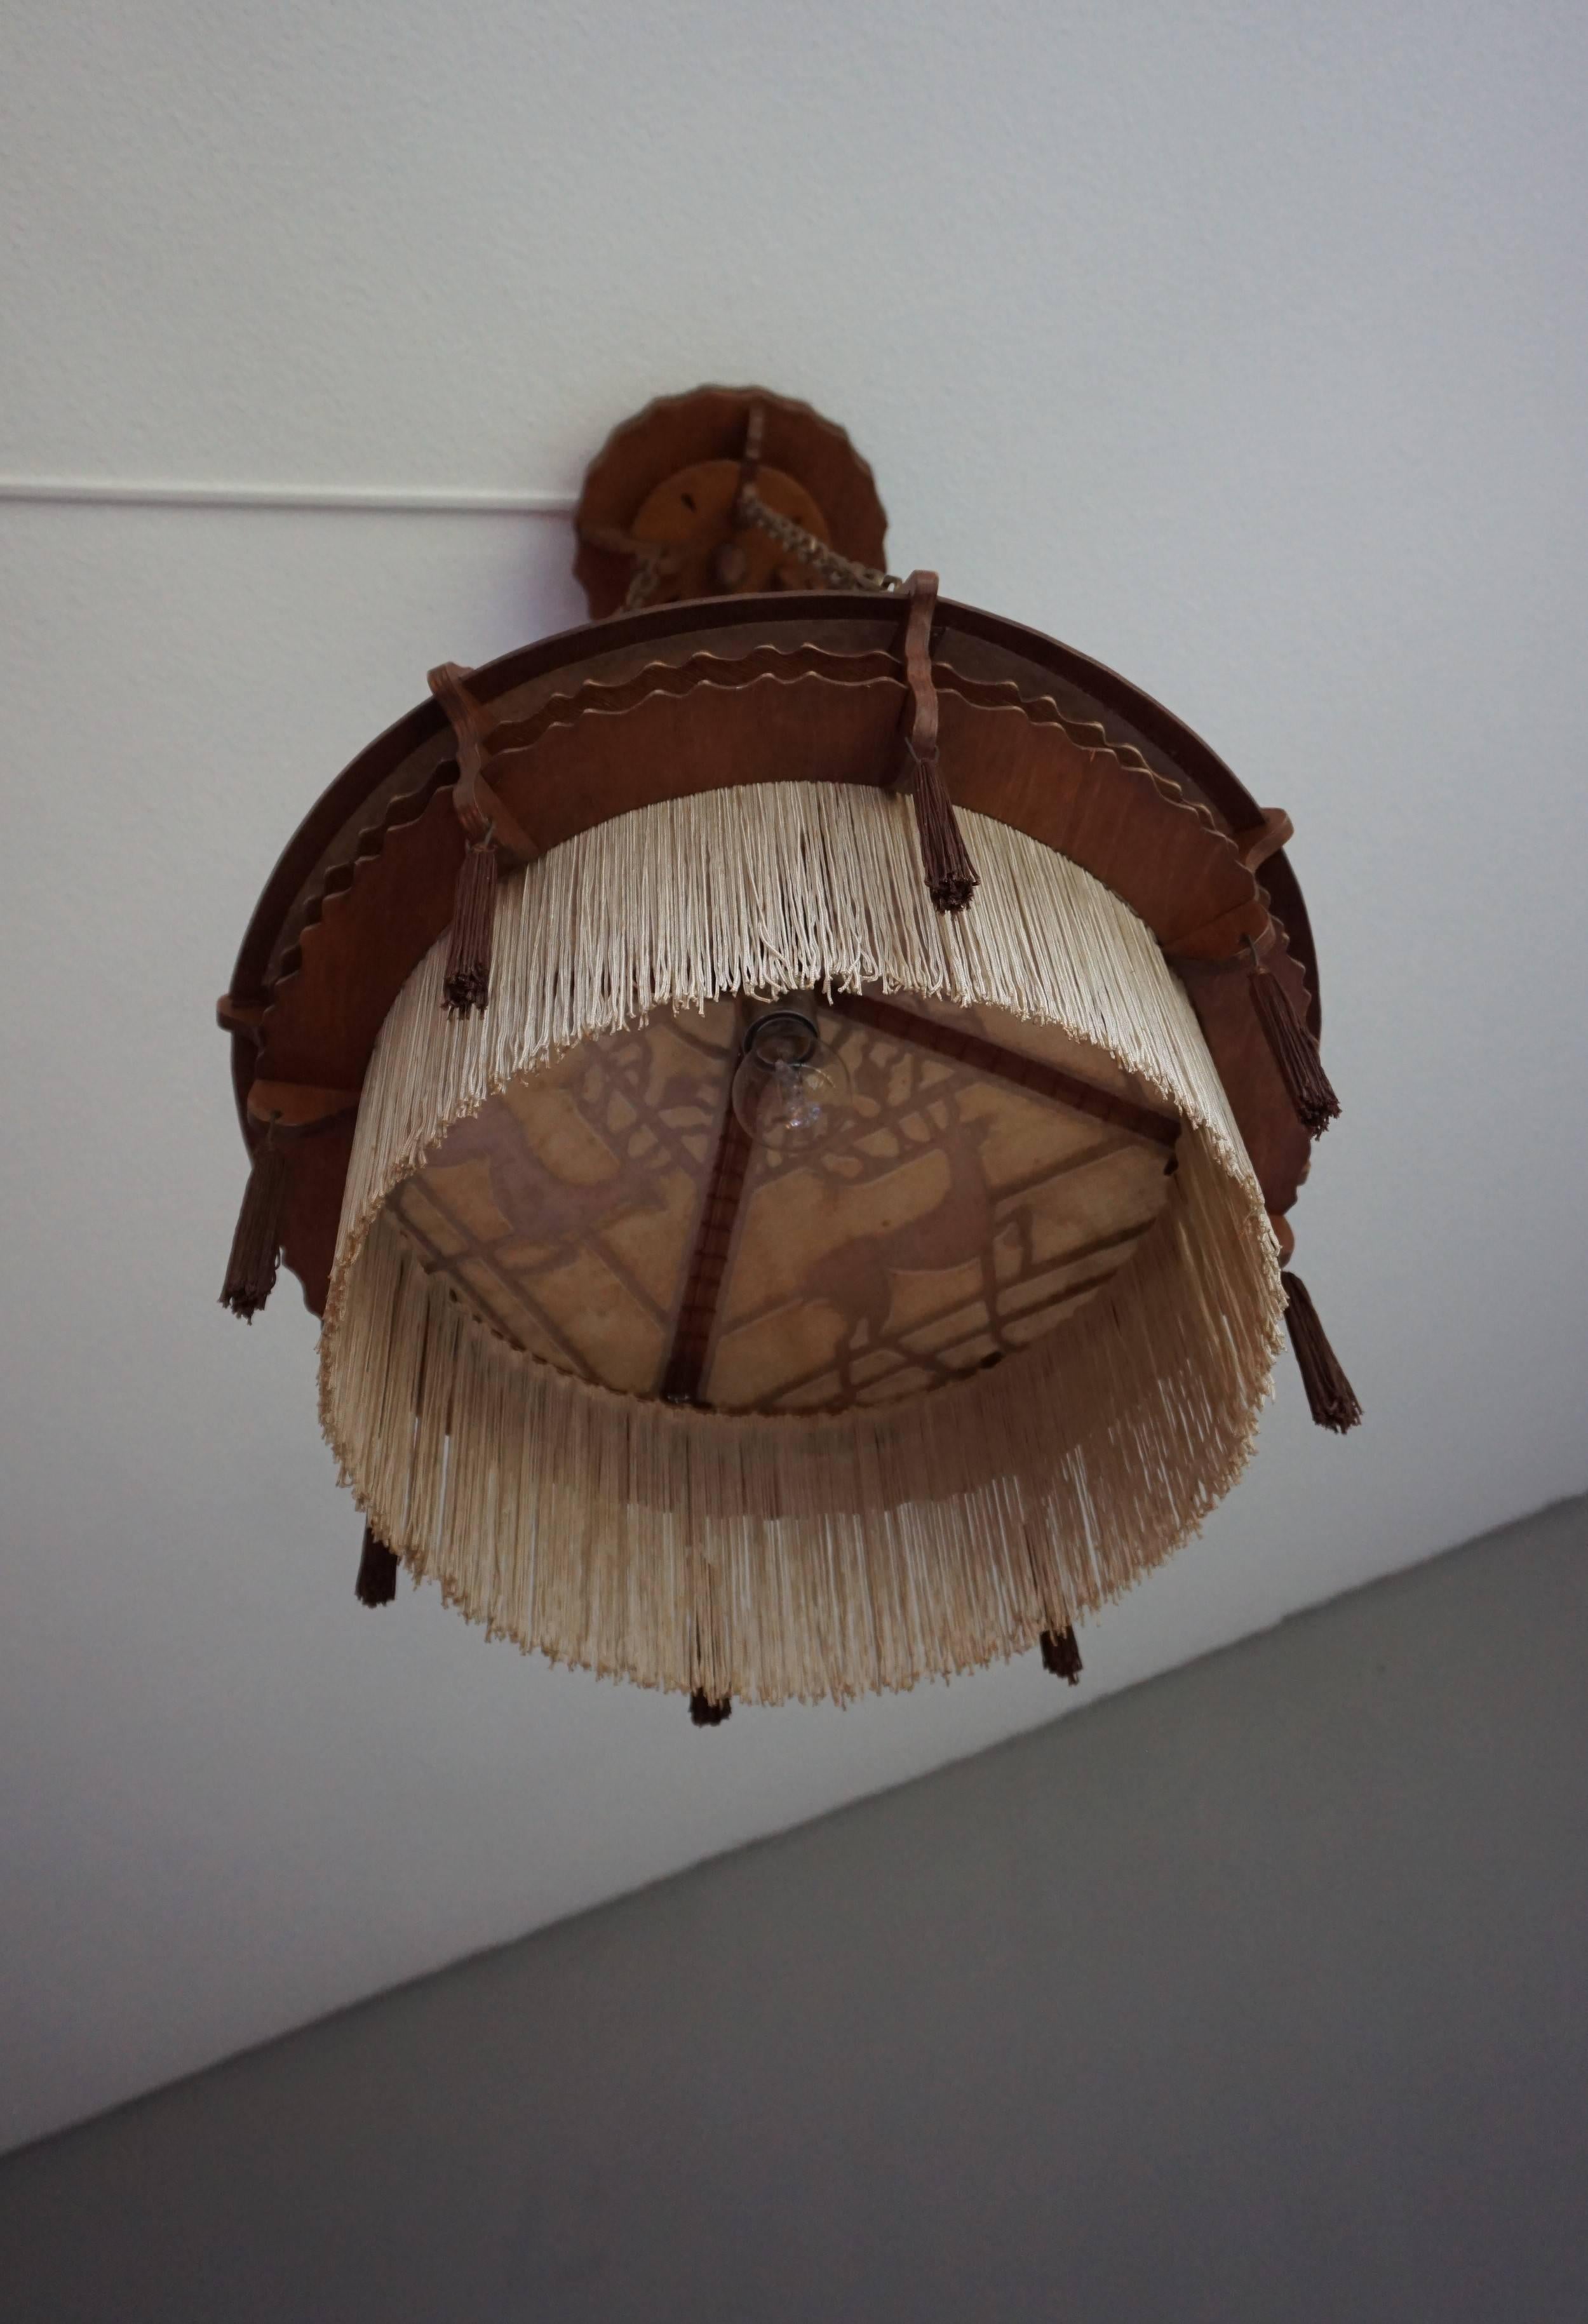 Early 20th Century Arts & Crafts Handsawn Wooden Pendant with Tassels & Fringes 2